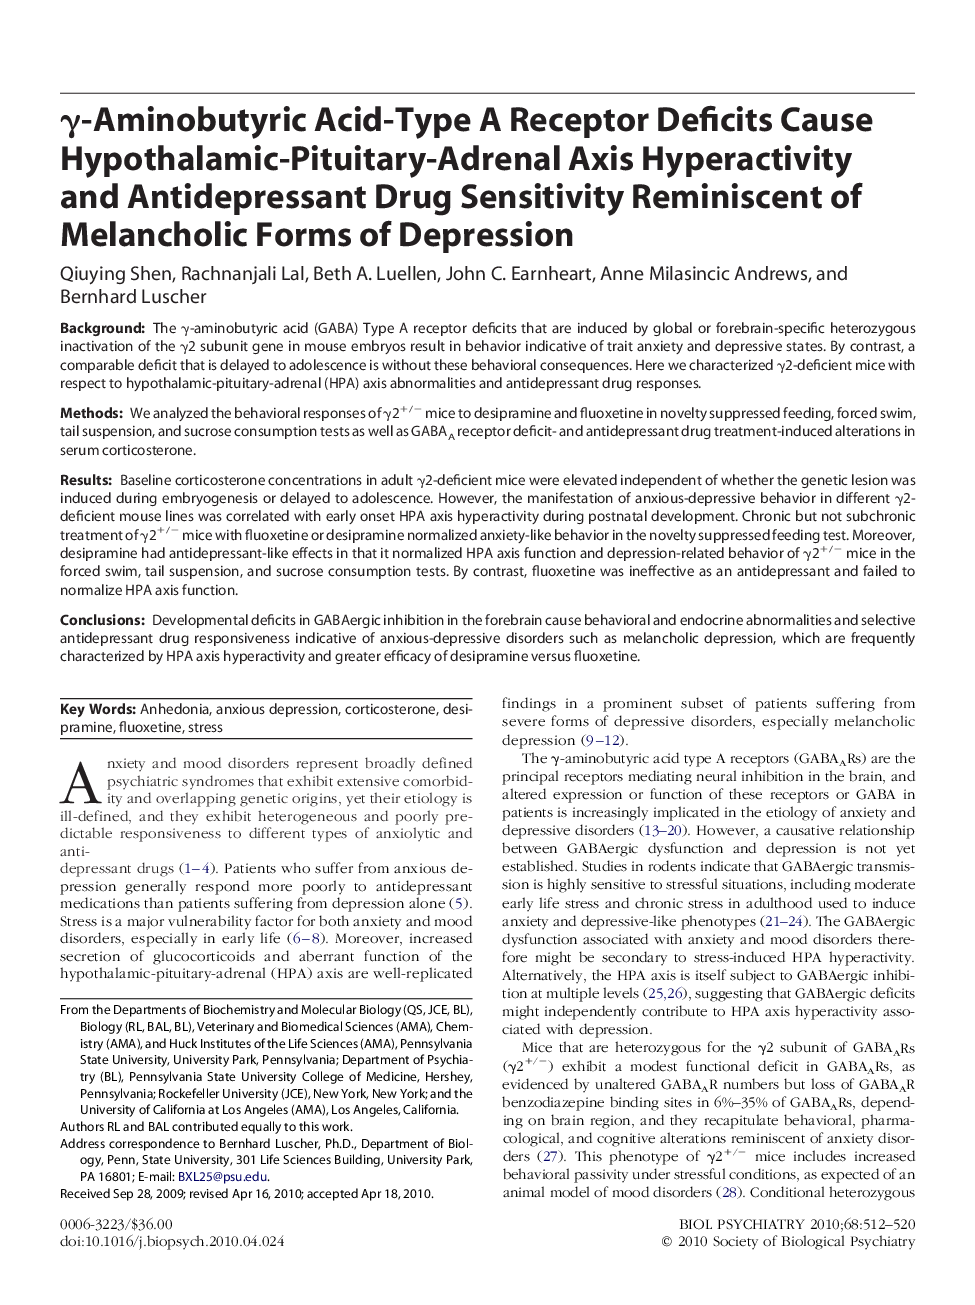 Î³-Aminobutyric Acid-Type A Receptor Deficits Cause Hypothalamic-Pituitary-Adrenal Axis Hyperactivity and Antidepressant Drug Sensitivity Reminiscent of Melancholic Forms of Depression